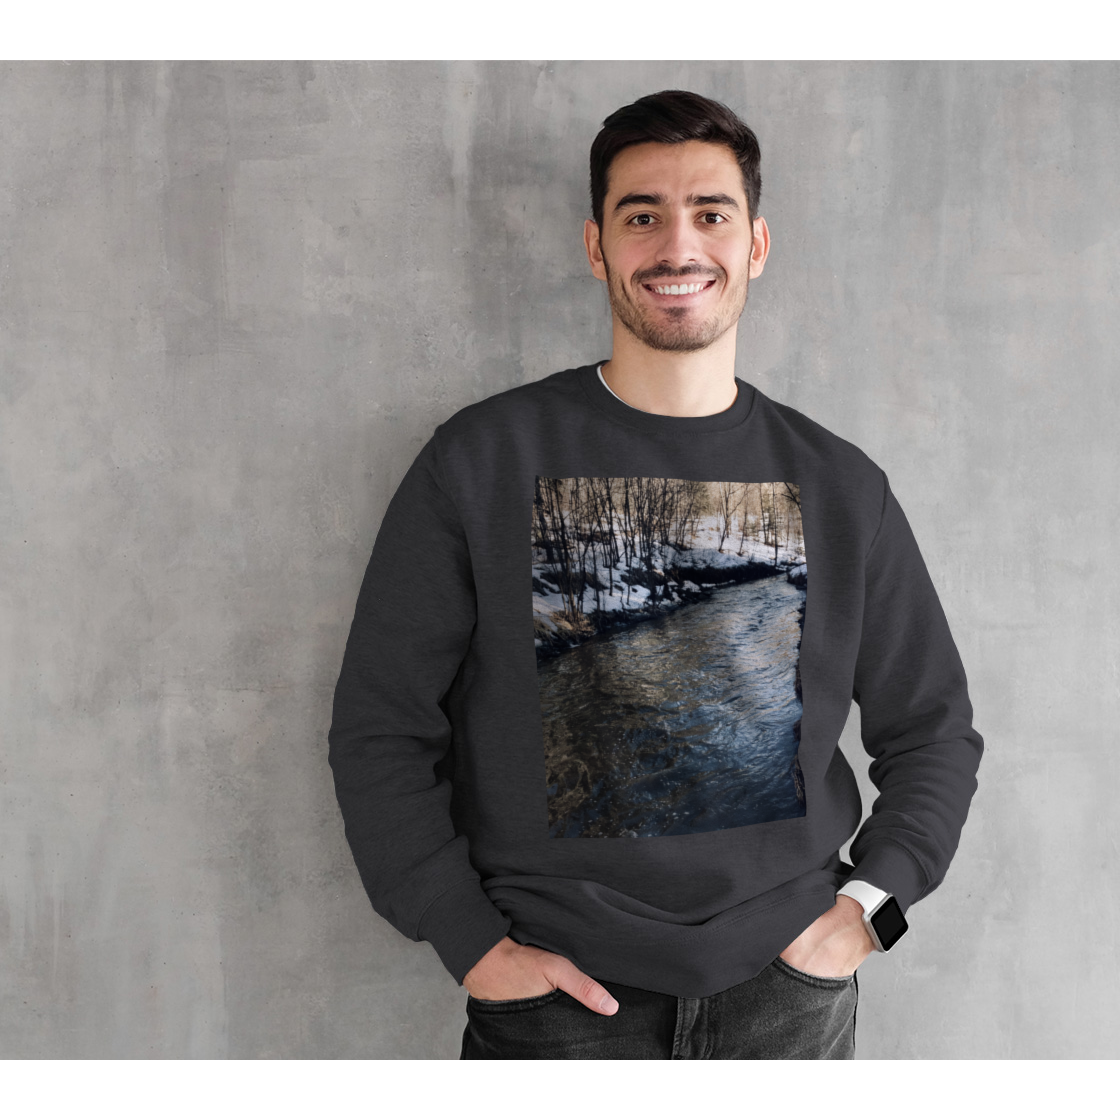 Sweatshirt for Women and Men with River Running Picture, Male Front